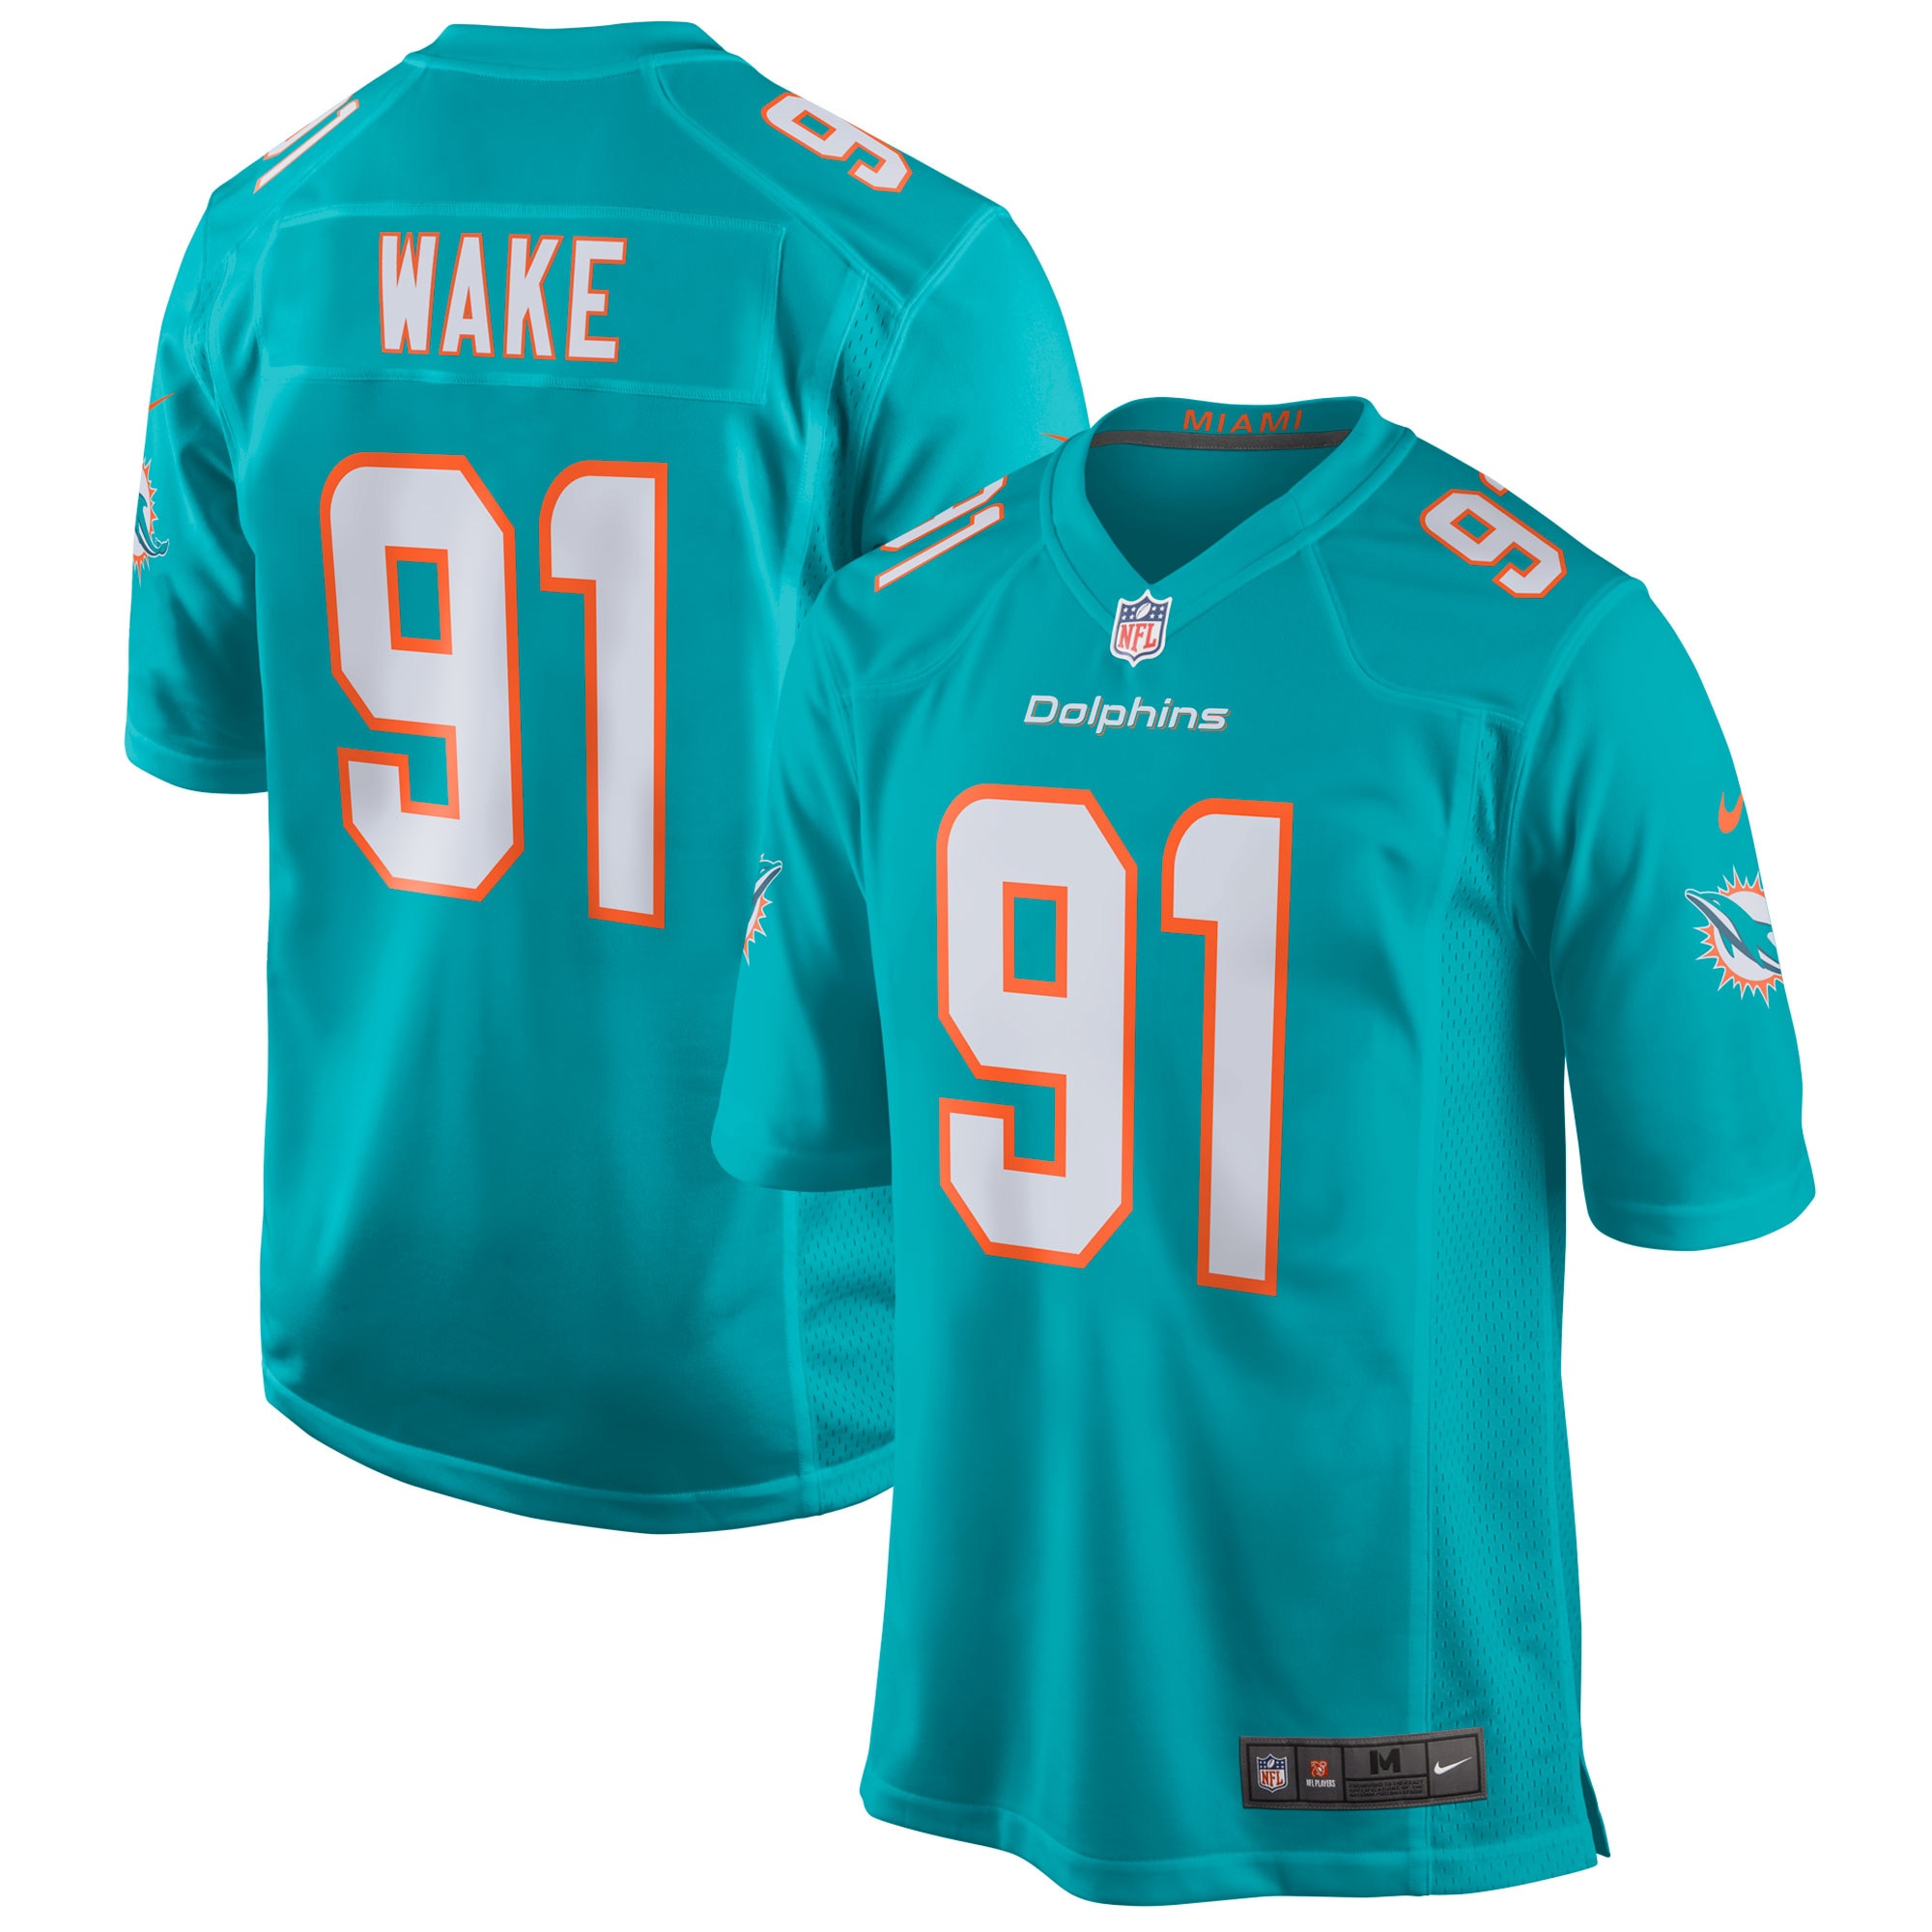 dolphins wake jersey